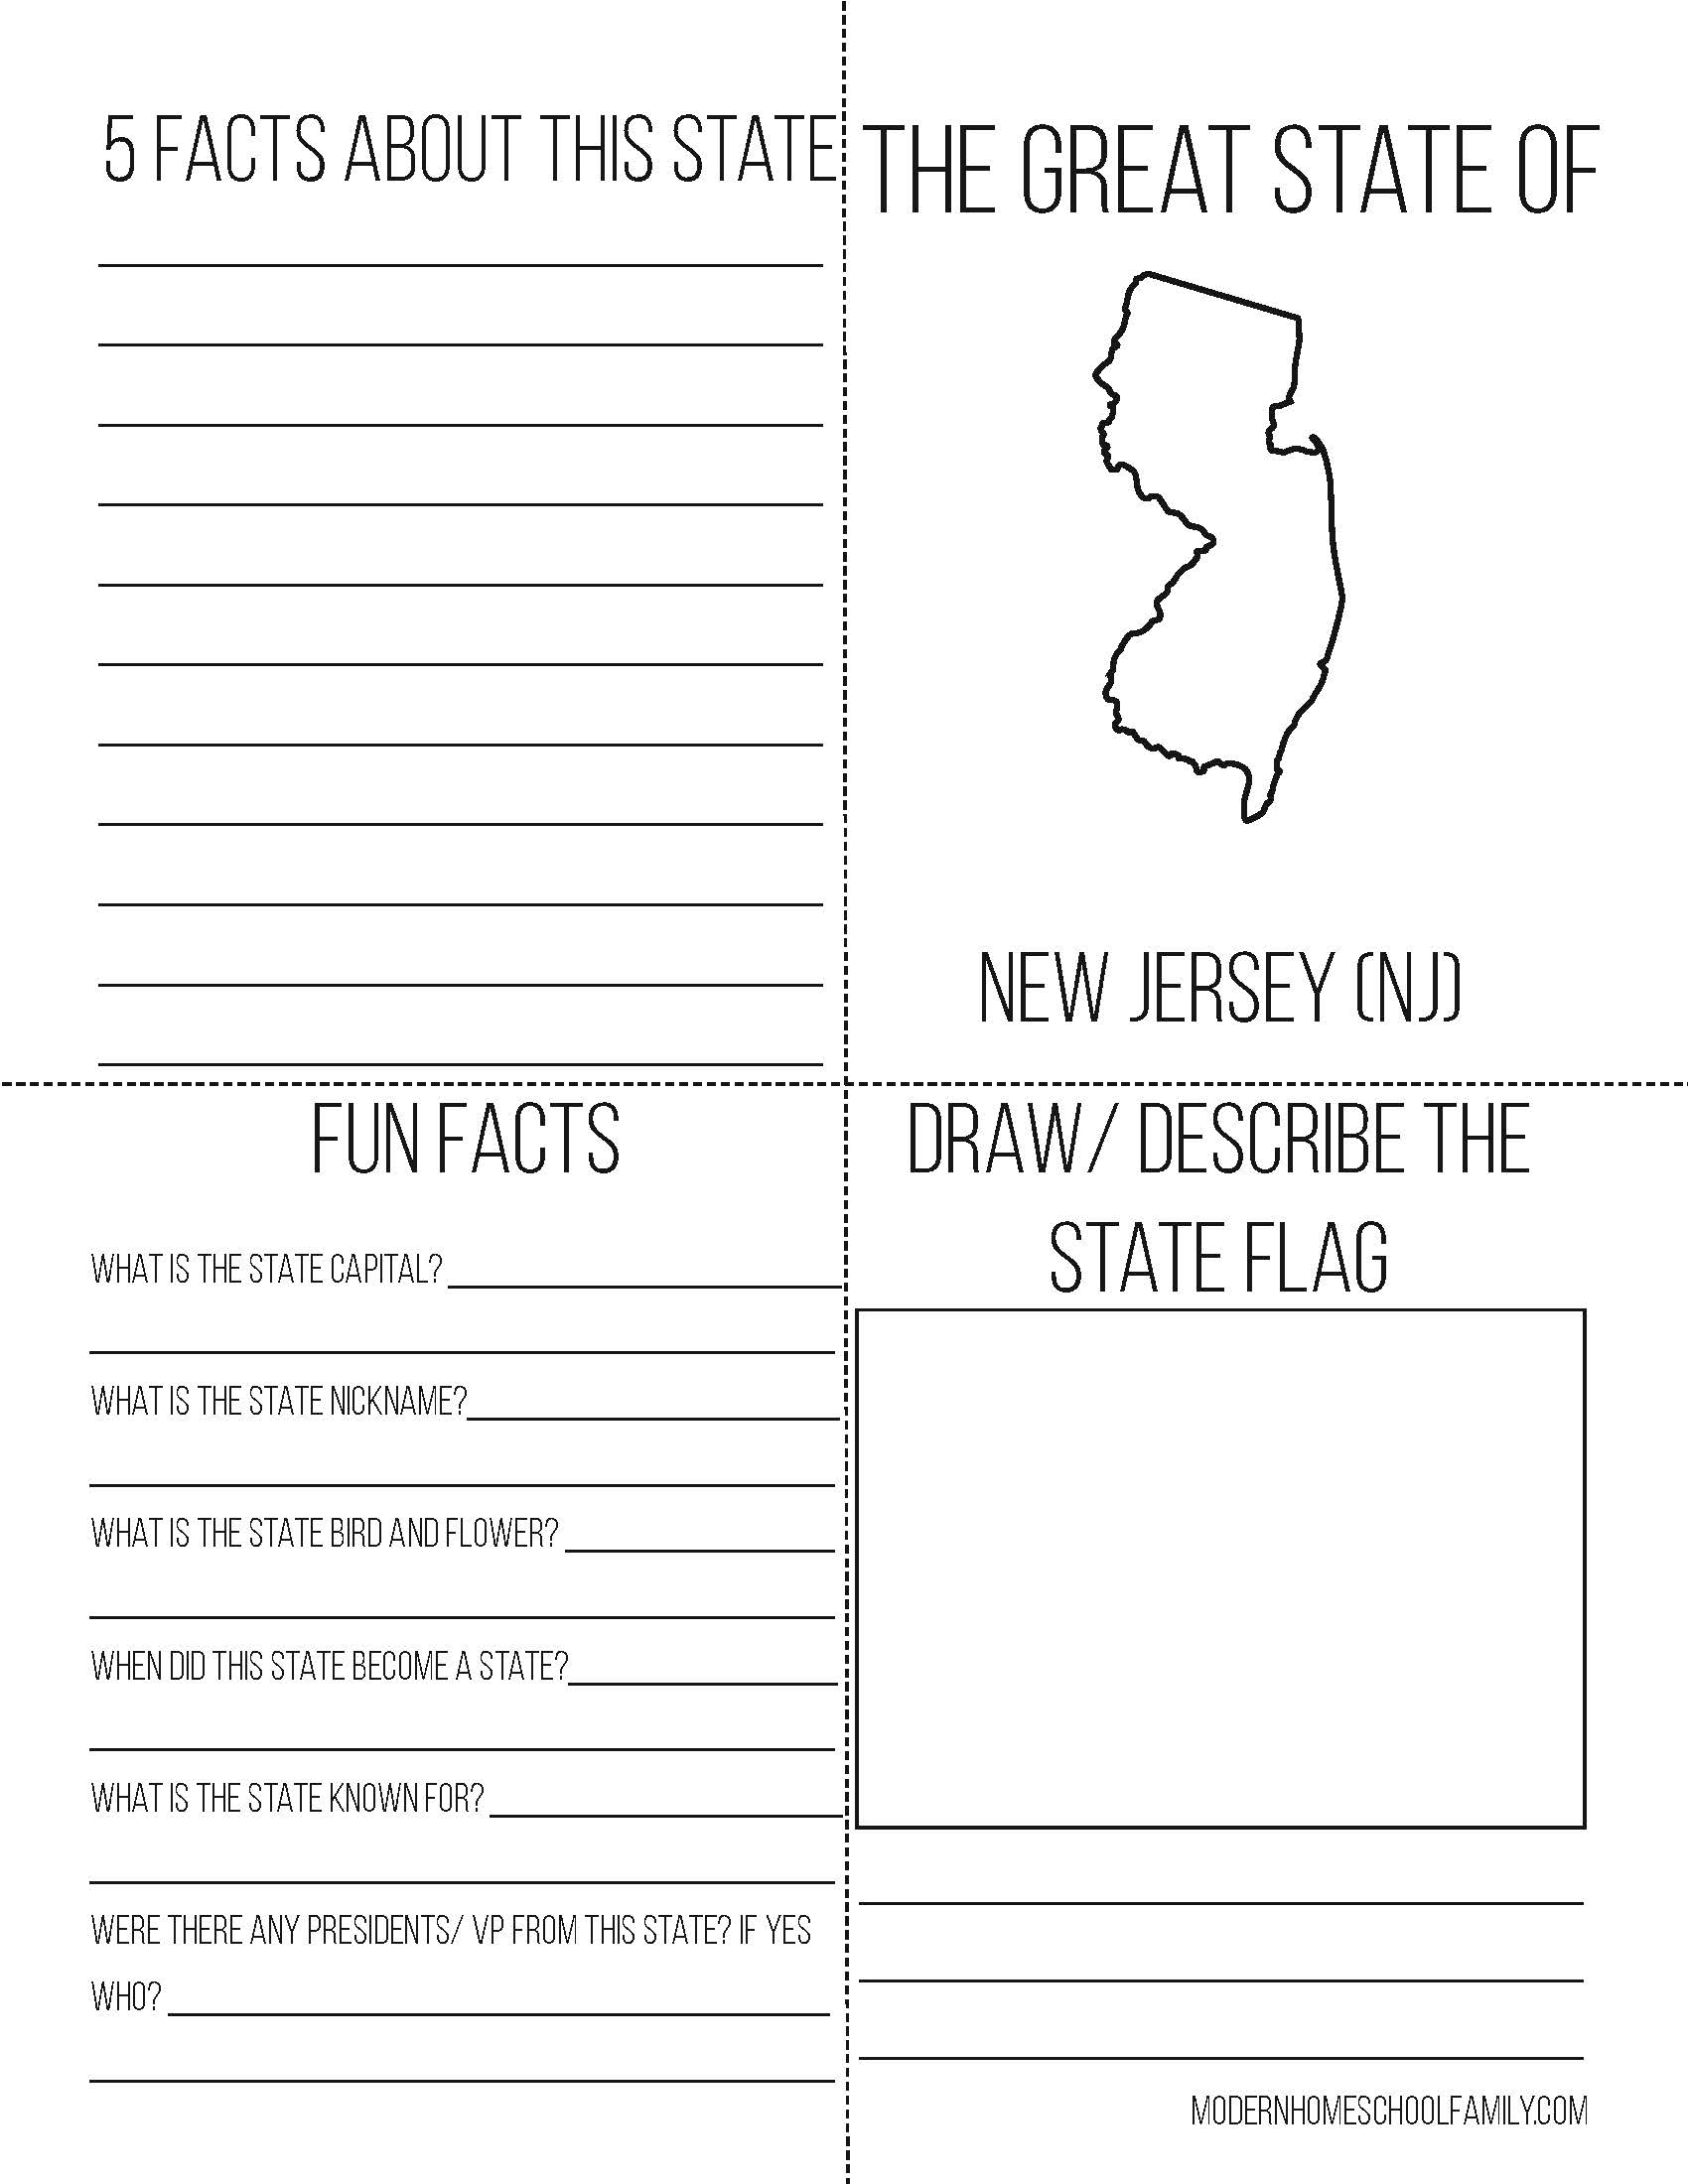 50 States Notebooking Unit for Homeschoolers (B & W)